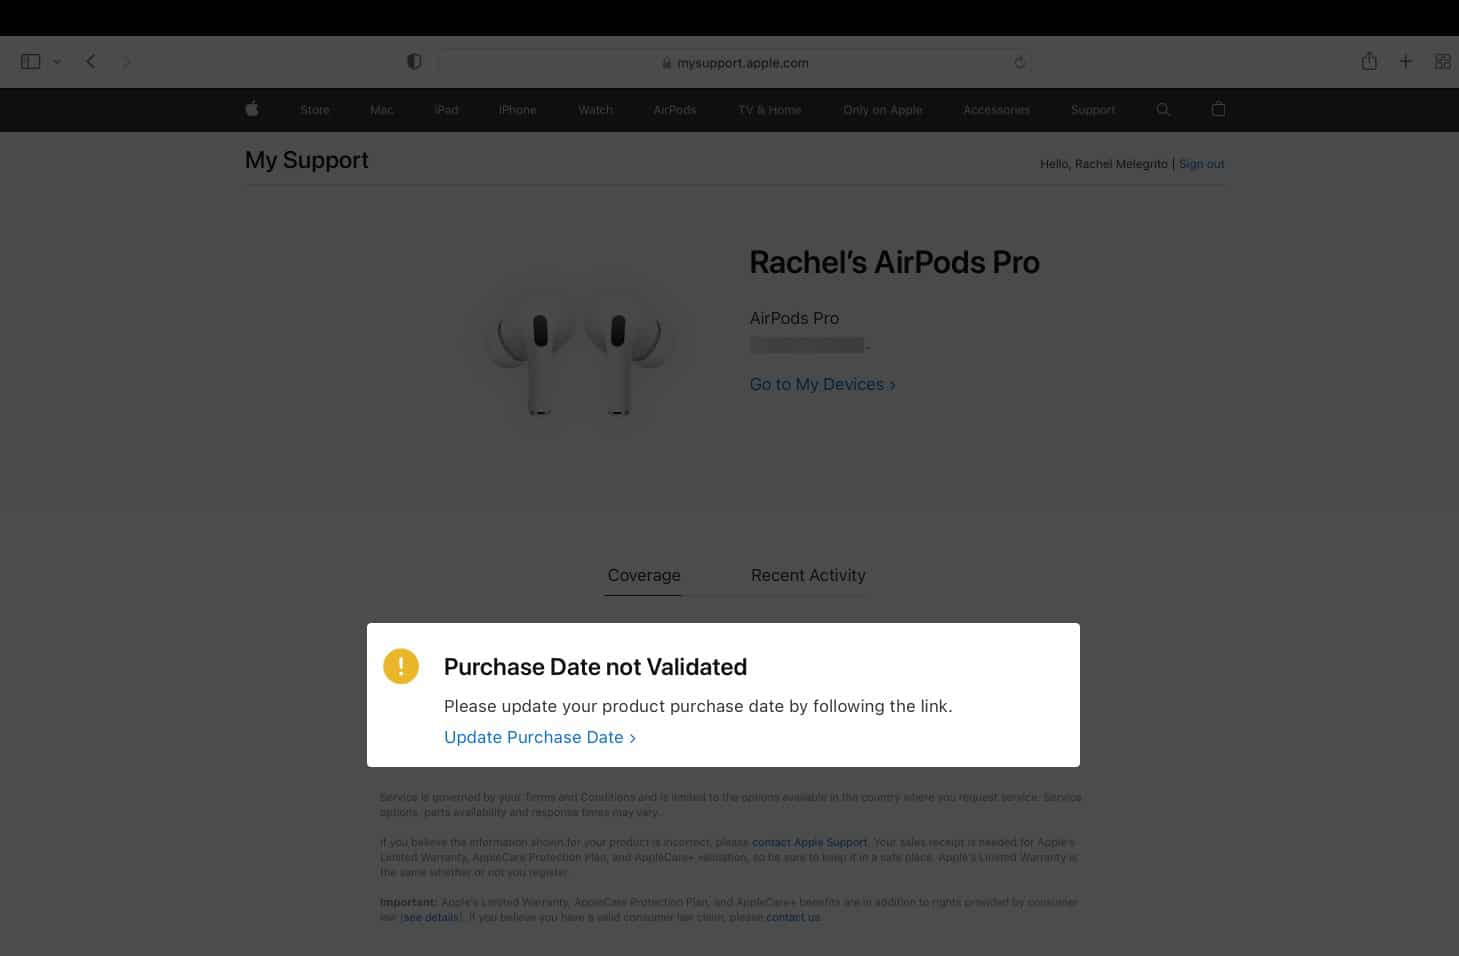 Purchase Validation error in a Browser on a Mac